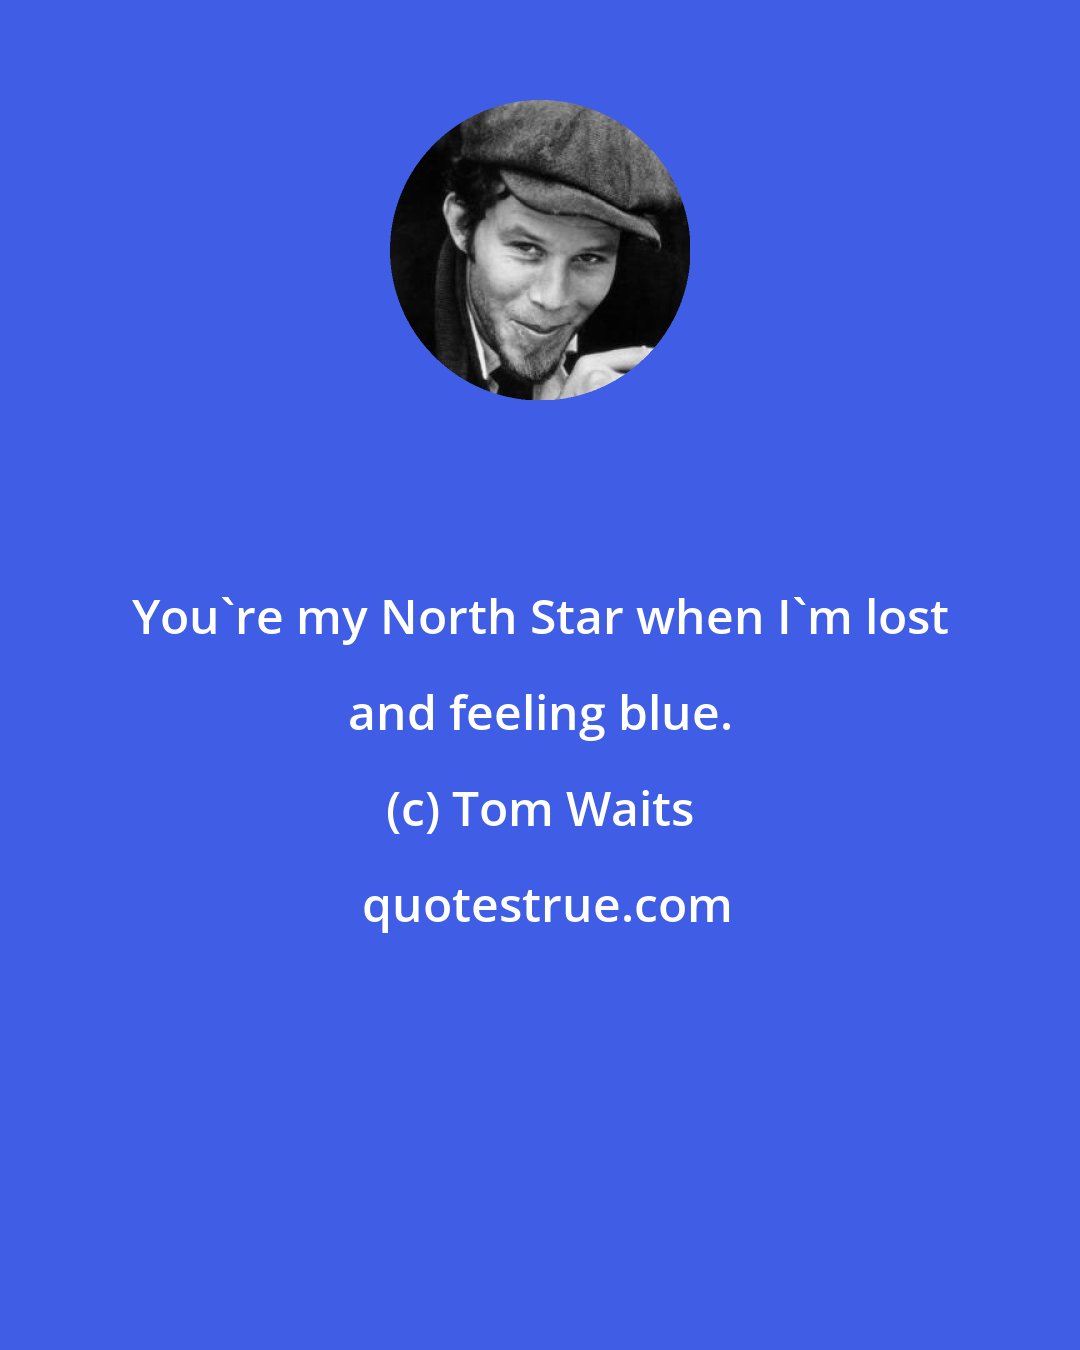 Tom Waits: You're my North Star when I'm lost and feeling blue.